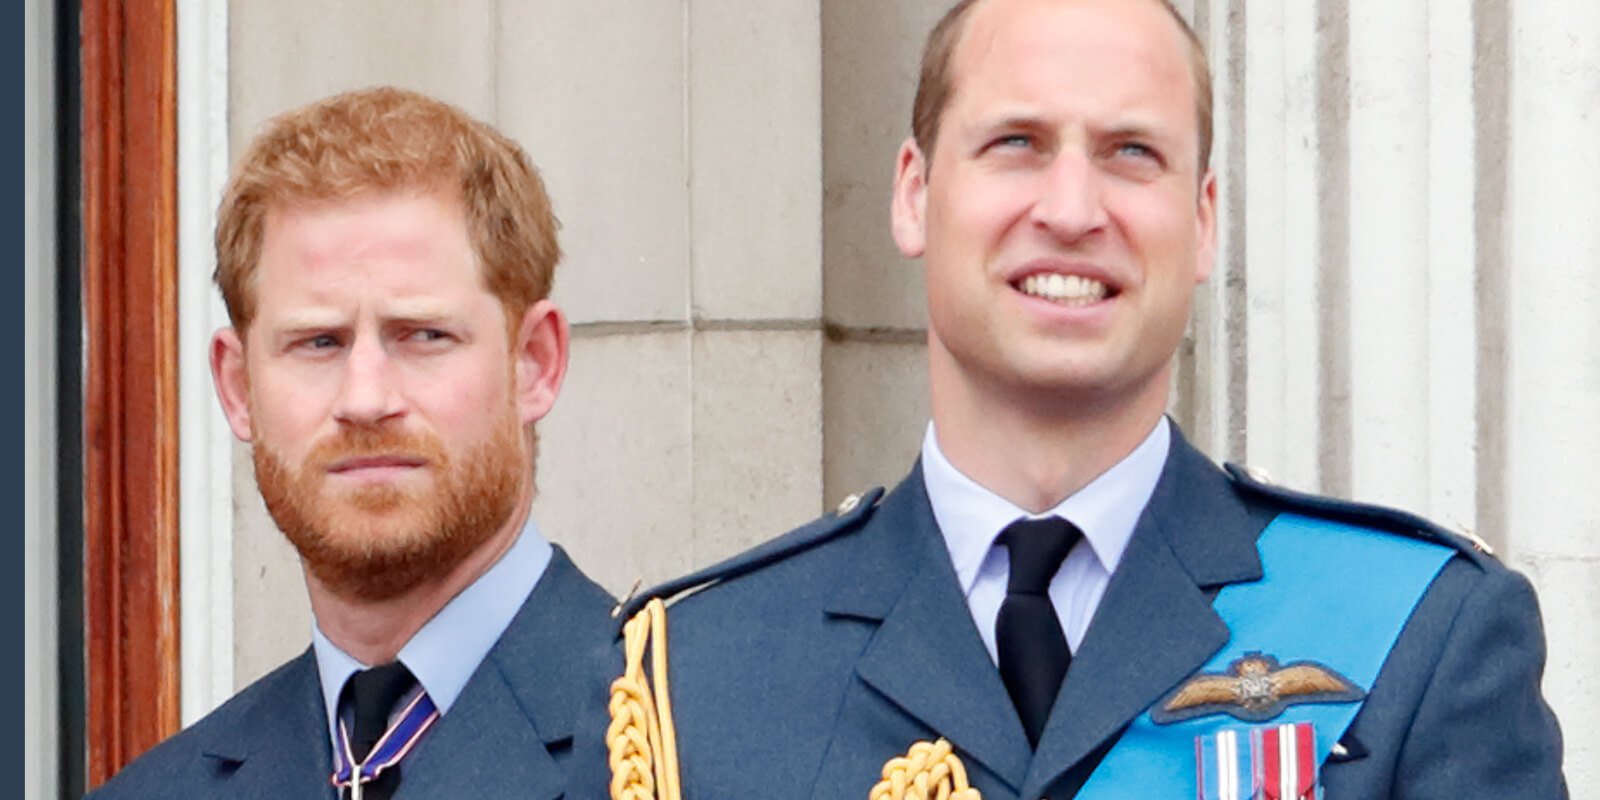 Prince Harry and Prince William's text exchange goes viral on TikTok.